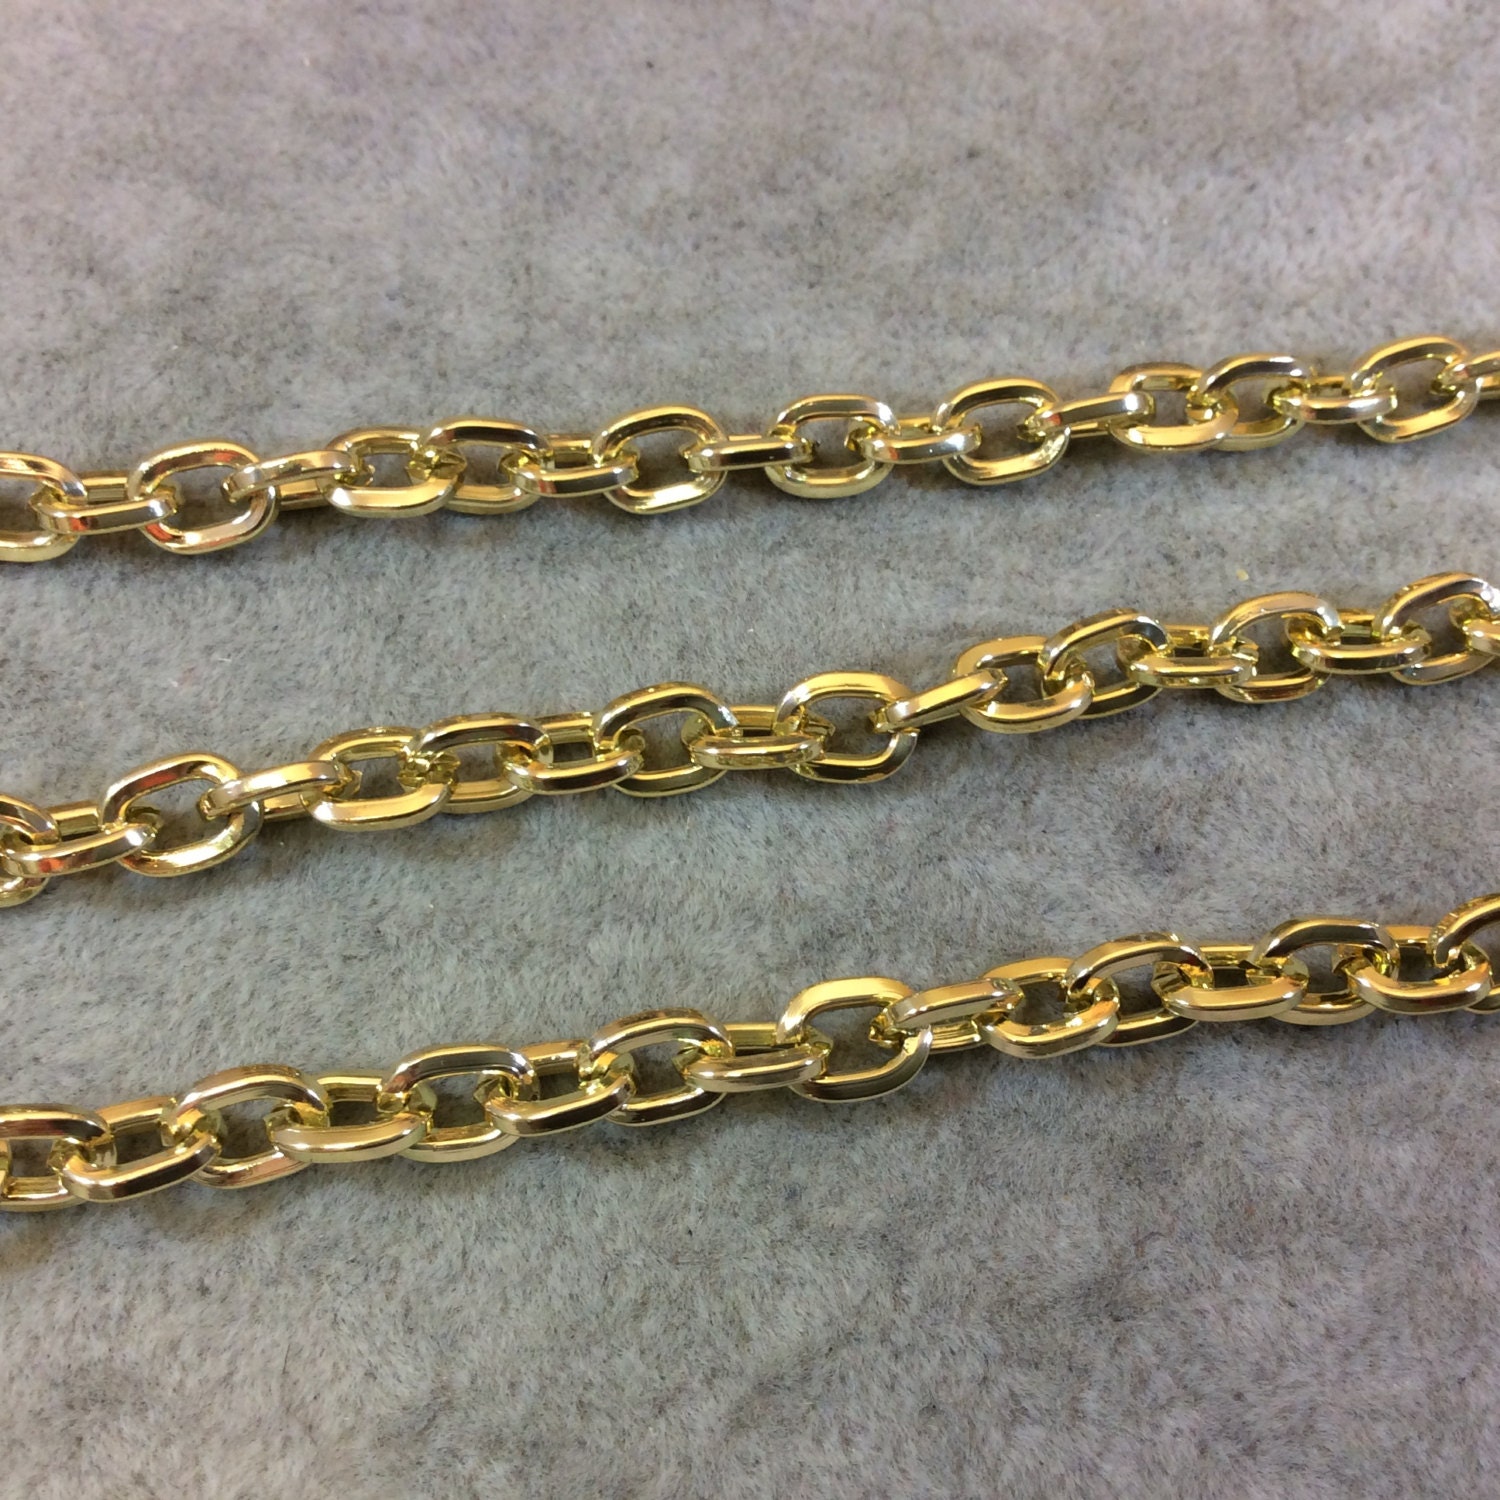 A1528 5' Section of Gold Finish Aluminum Oval Curb Chain